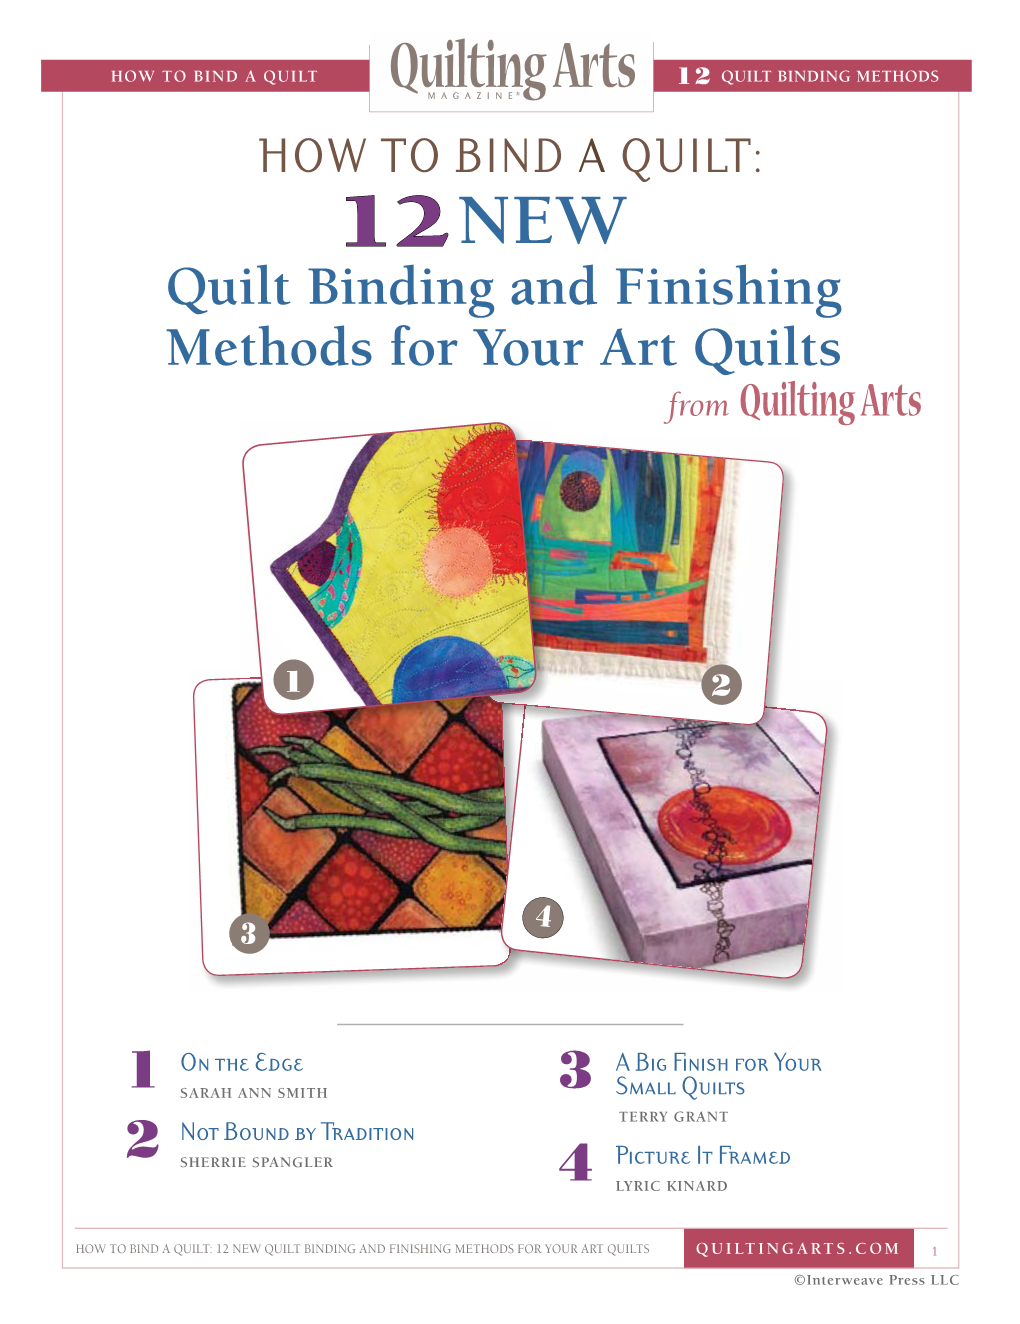 Quilt Binding and Finishing Methods for Your Art Quilts from Quilting Arts